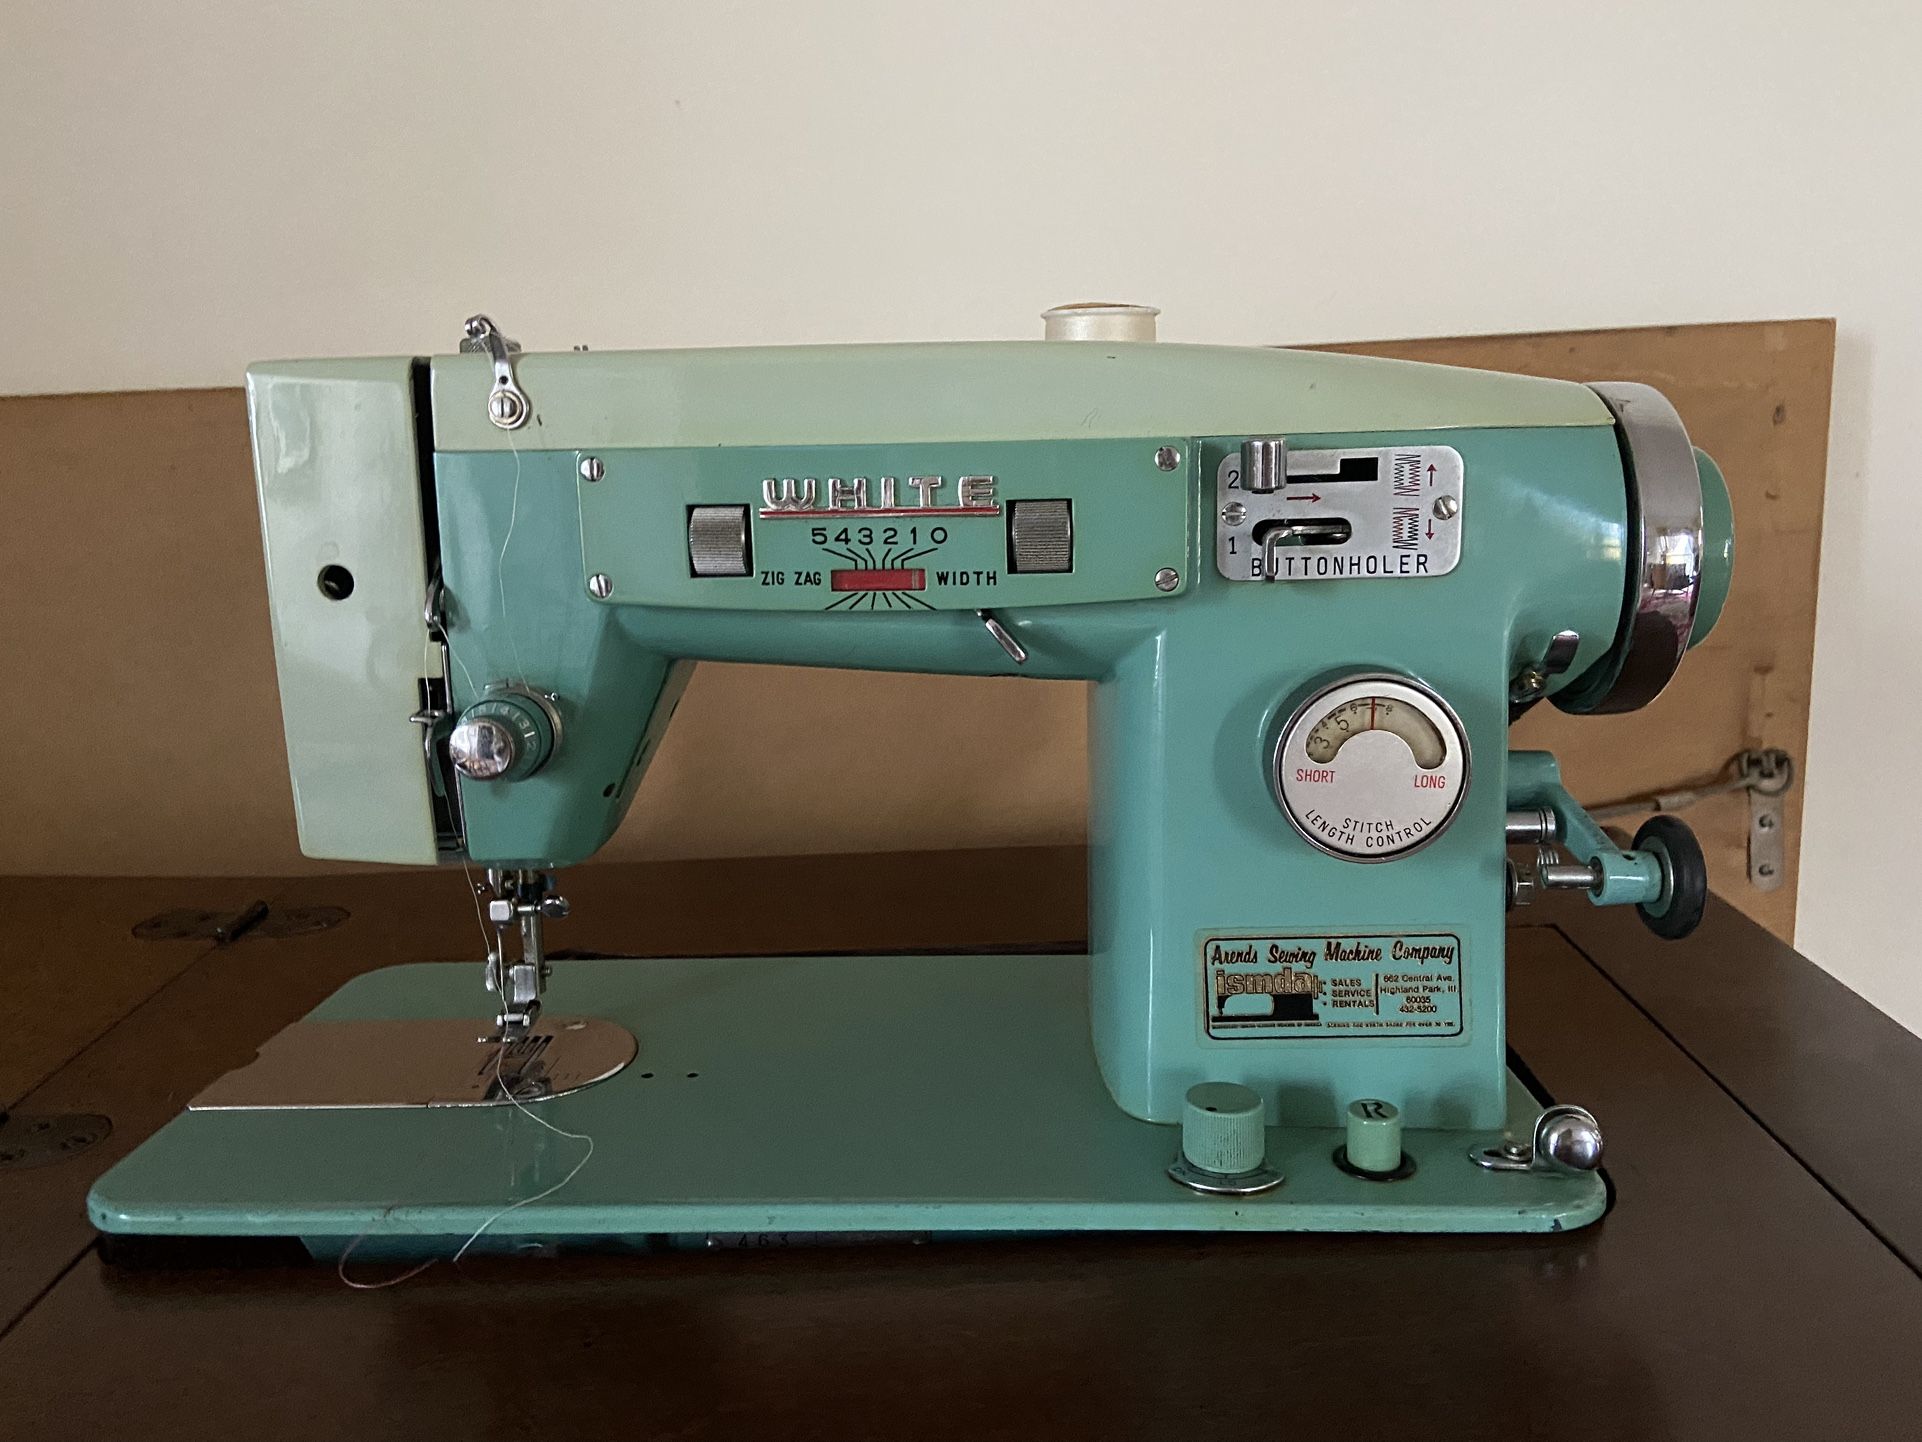 Vintage White Model 463 Sewing Machine. for Sale in Lincolnwood